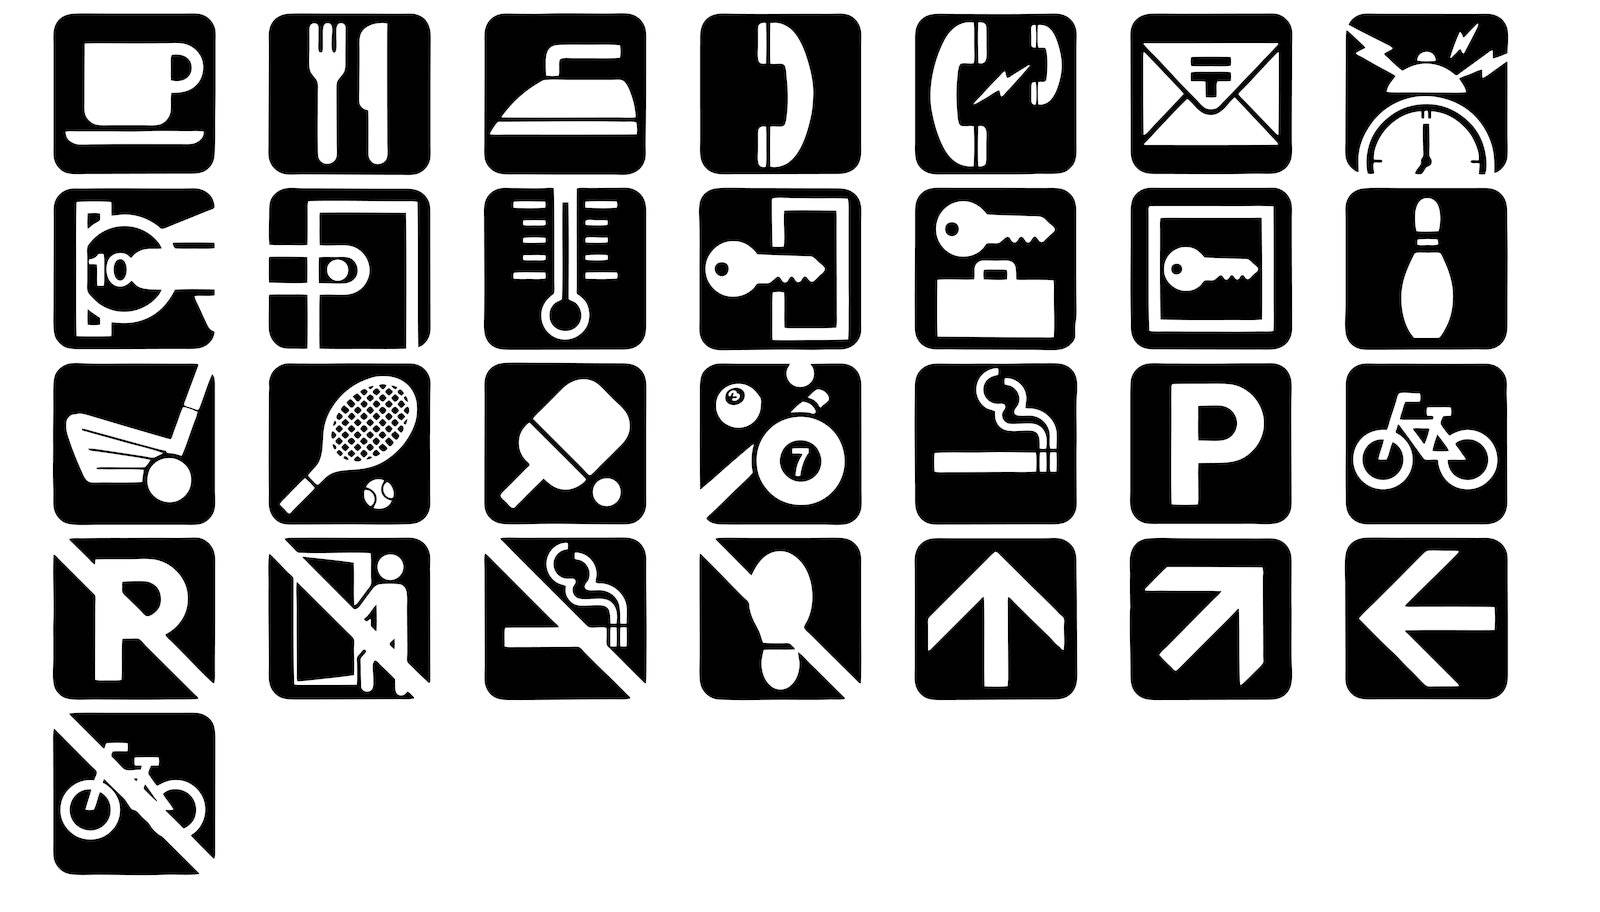 Miscellaneous Icons In Black And White vector by erburenu